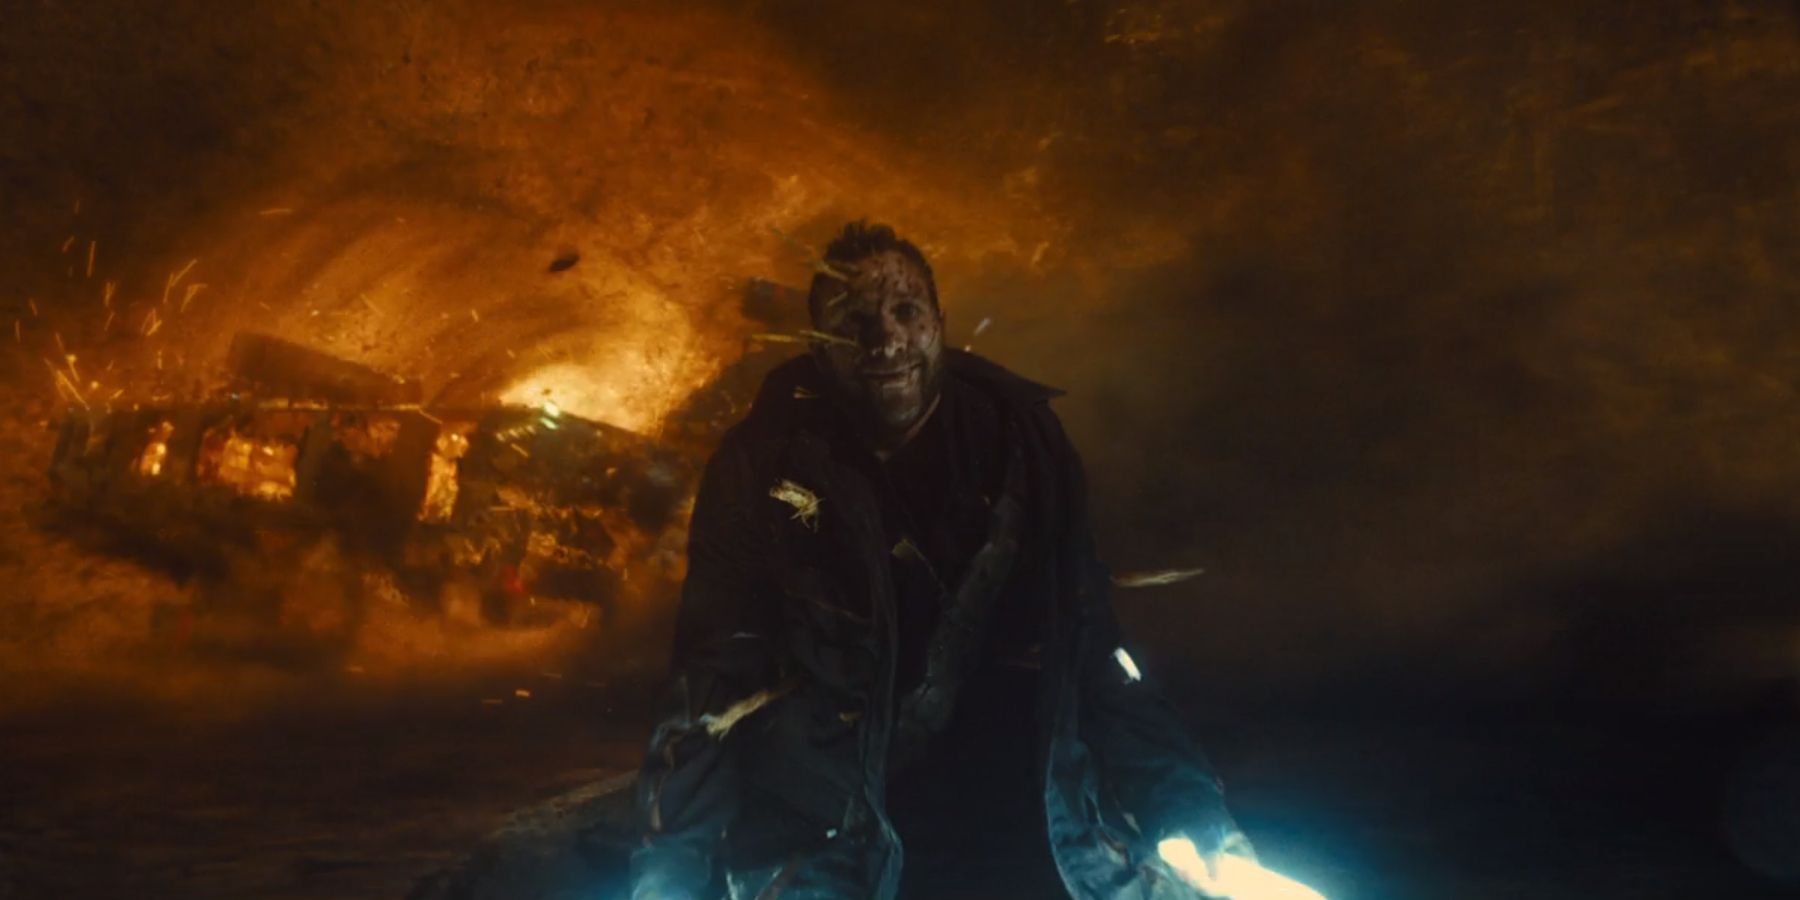 Captain Boomerang accepting his death by helicopter in James Gunn's The Suicide Squad